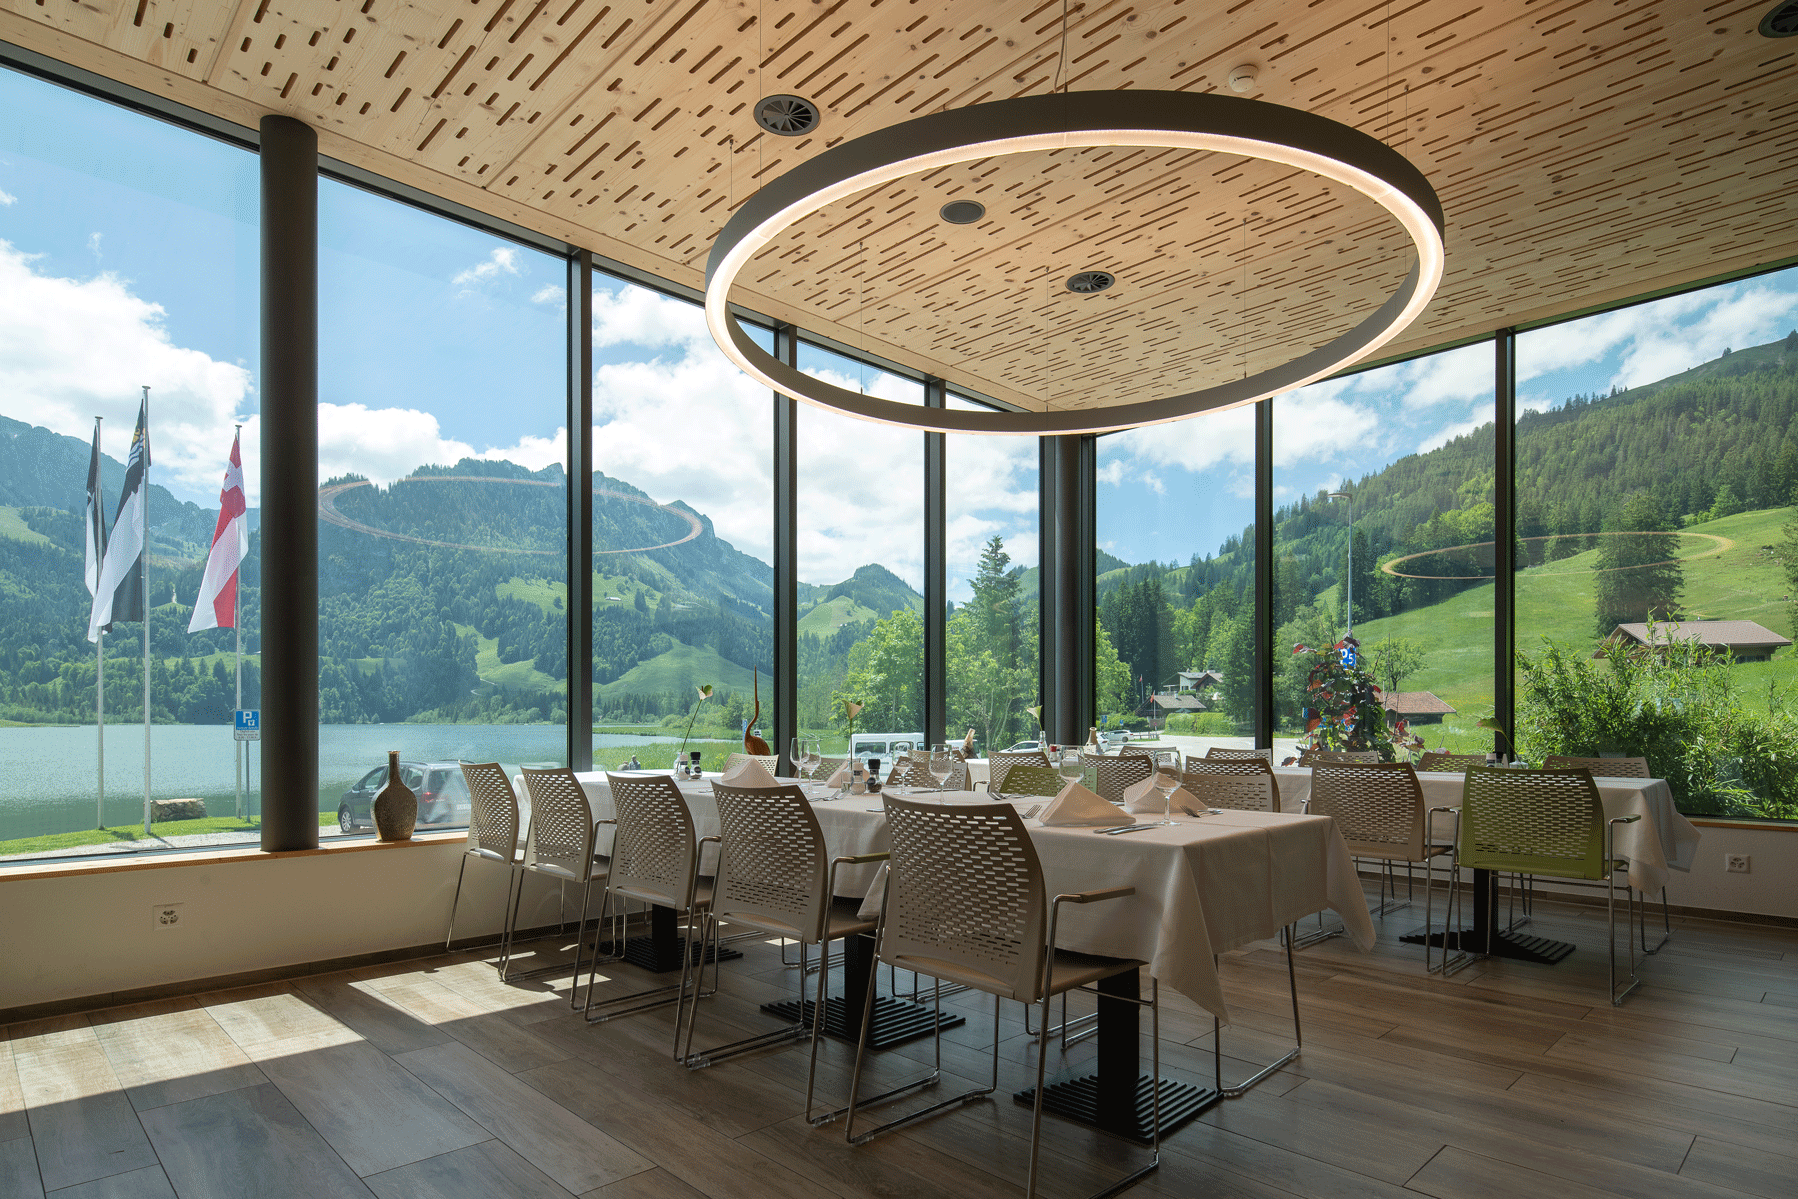 Picture showing the restaurant with mountains in the background. The glass is not tinted.